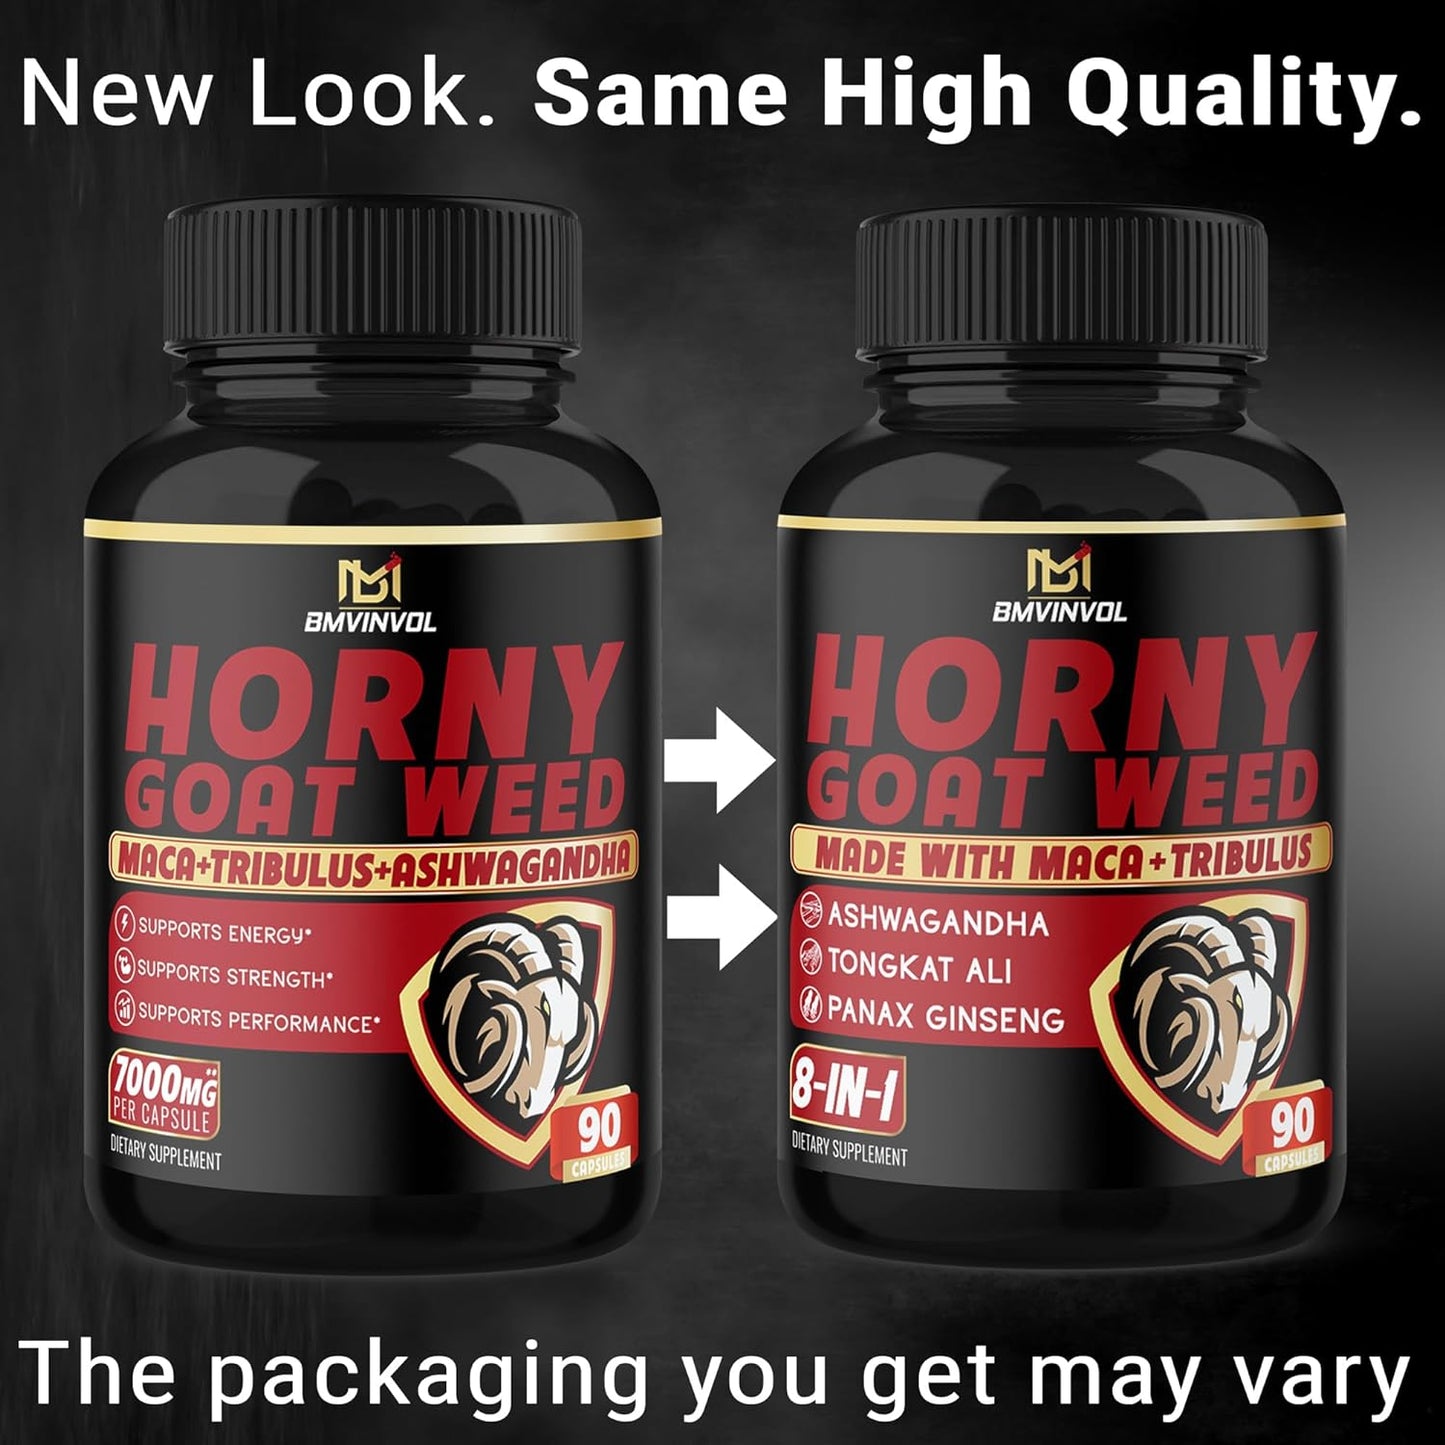 Horny Goat Weed Capsules - 7000Mg Herbal Equivalent - Maca, Ginseng, Tribulus Terrestris, Ashwagandha - Performance and Energy Support - 3 Month Supply